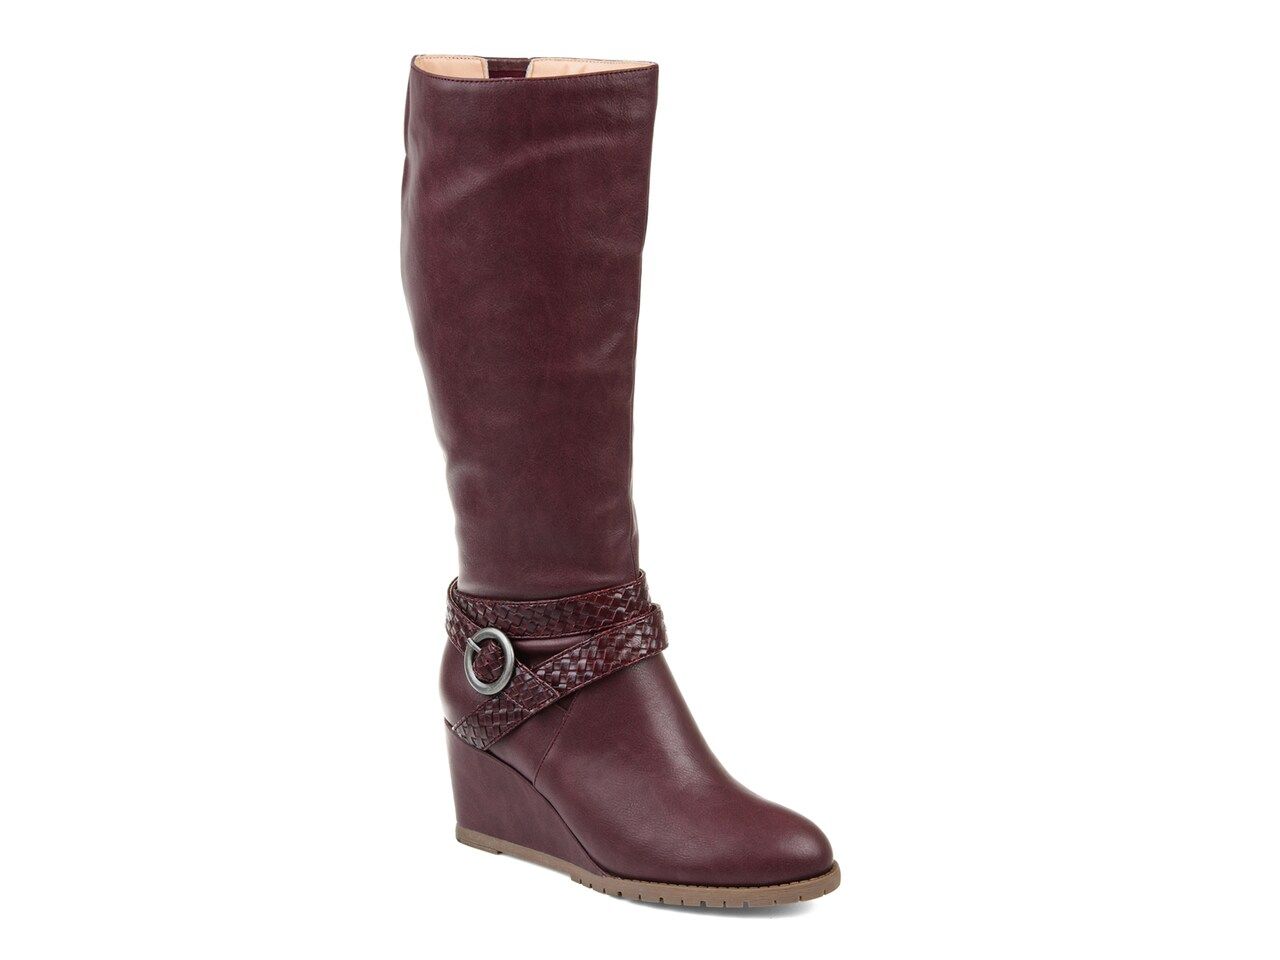 Journee Collection Garin Wide Calf Wedge Boot | DSW